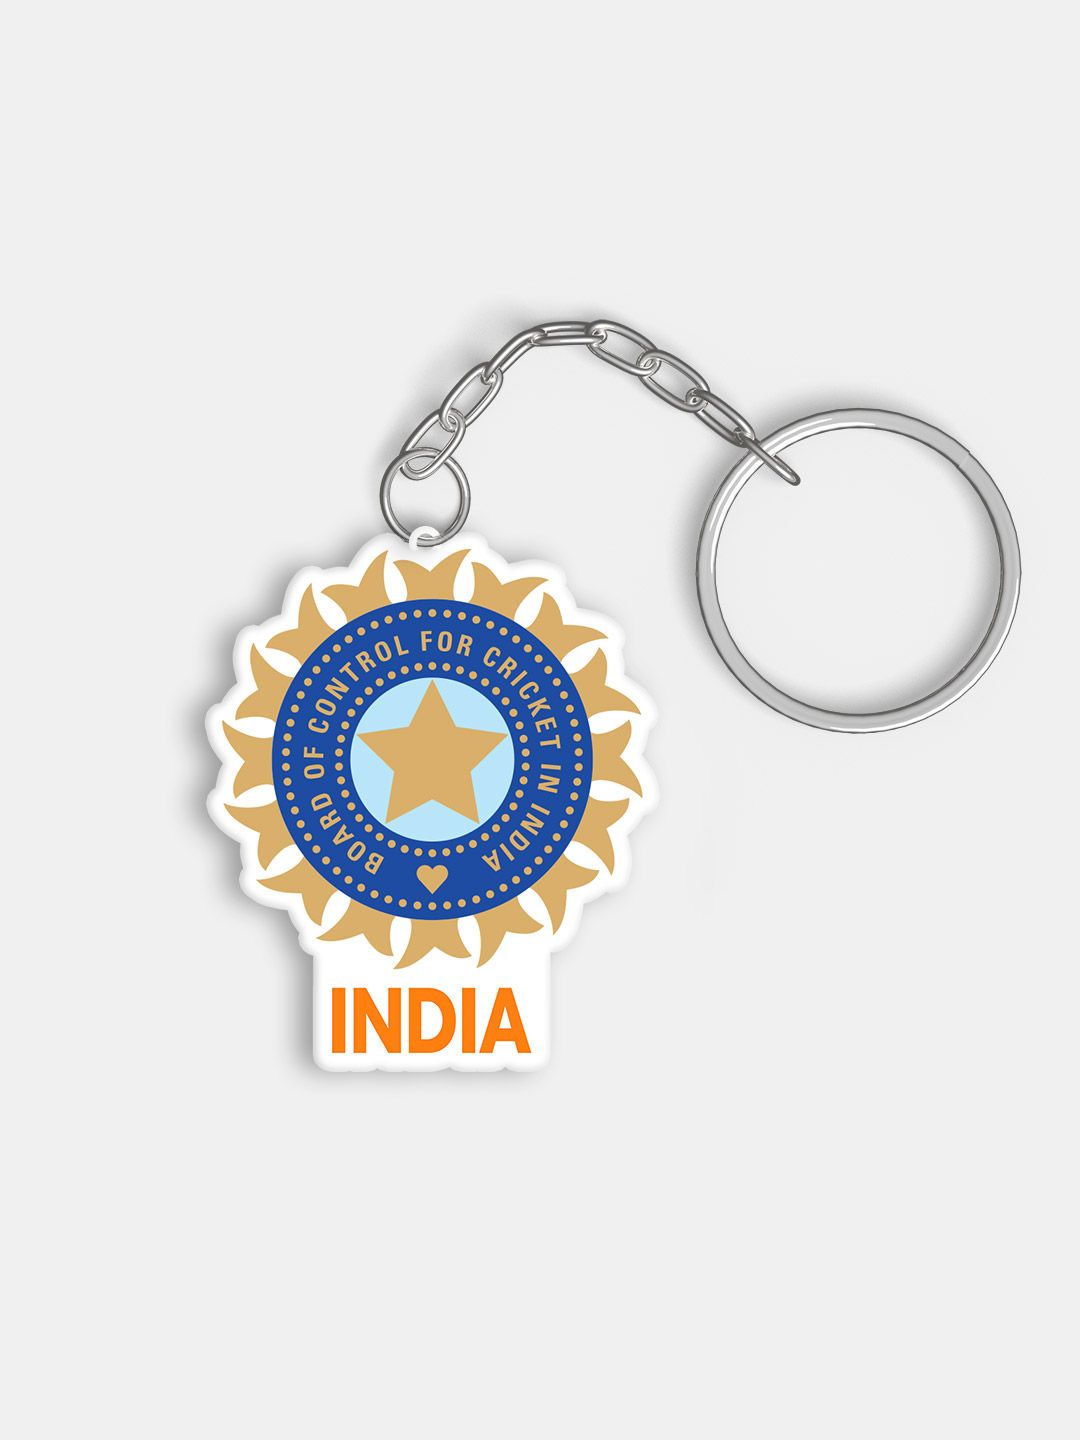 Bcci: Latest News, Videos and Photos of Bcci | Times of India